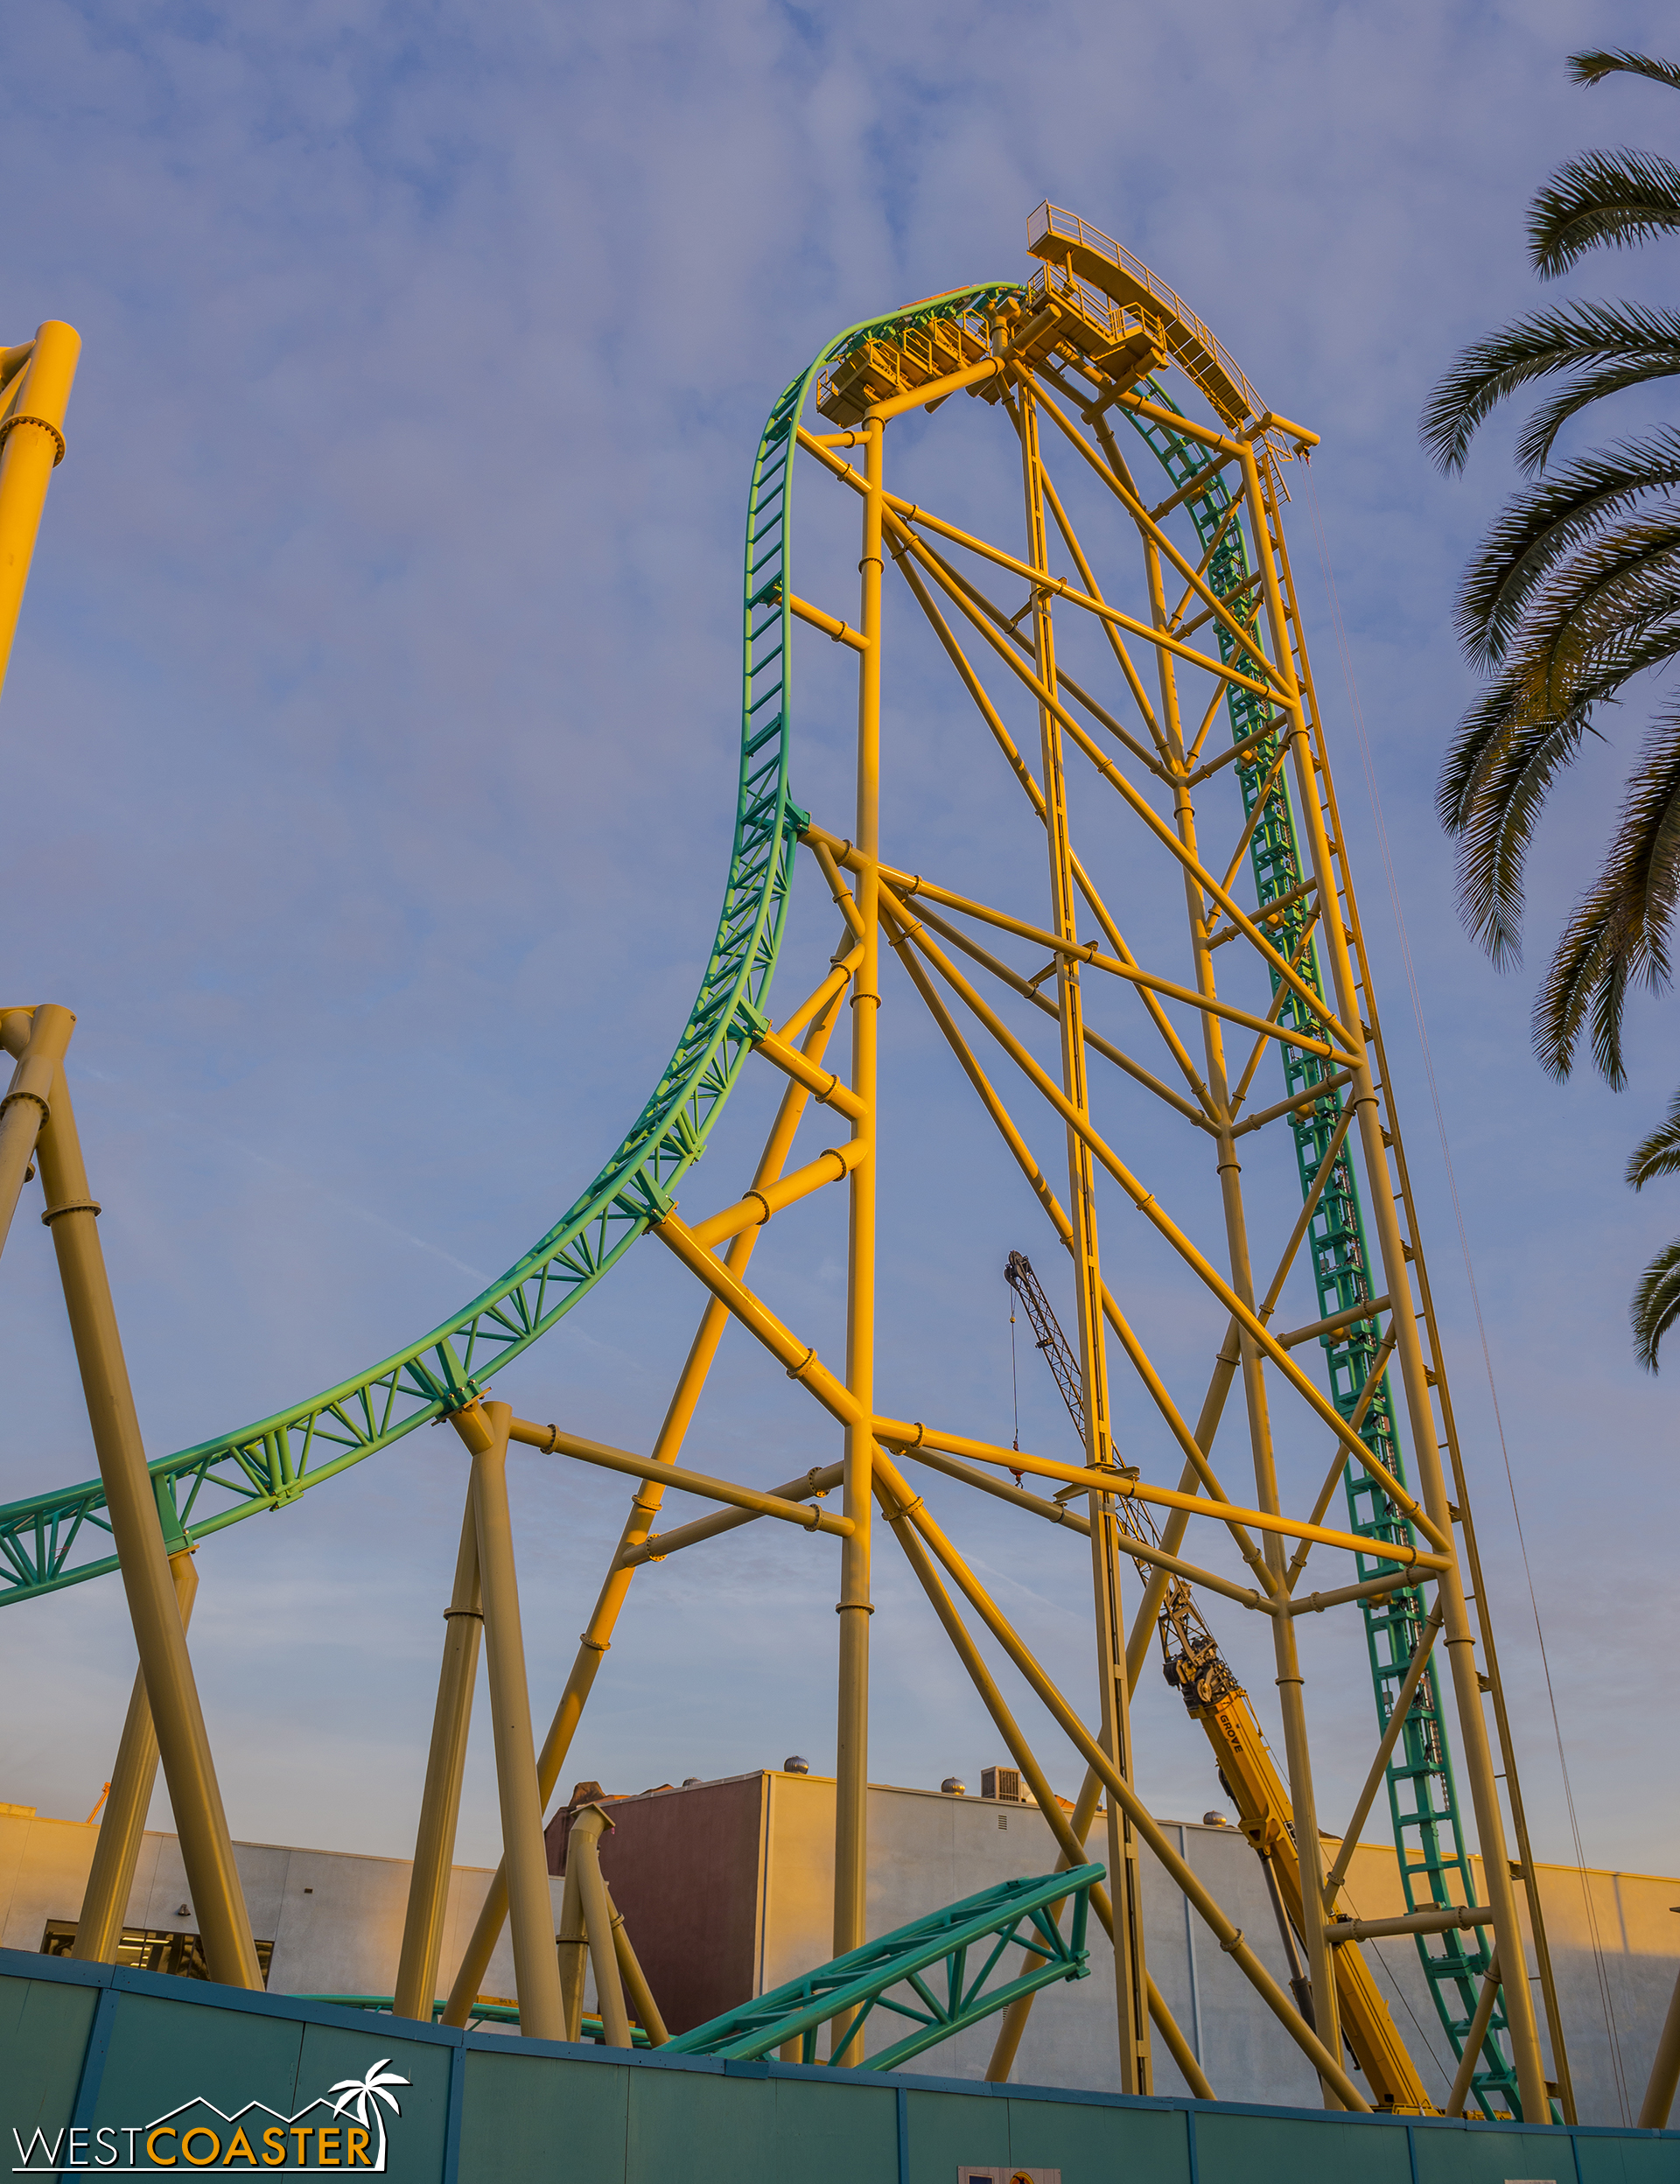  Yes, that lift hill. 